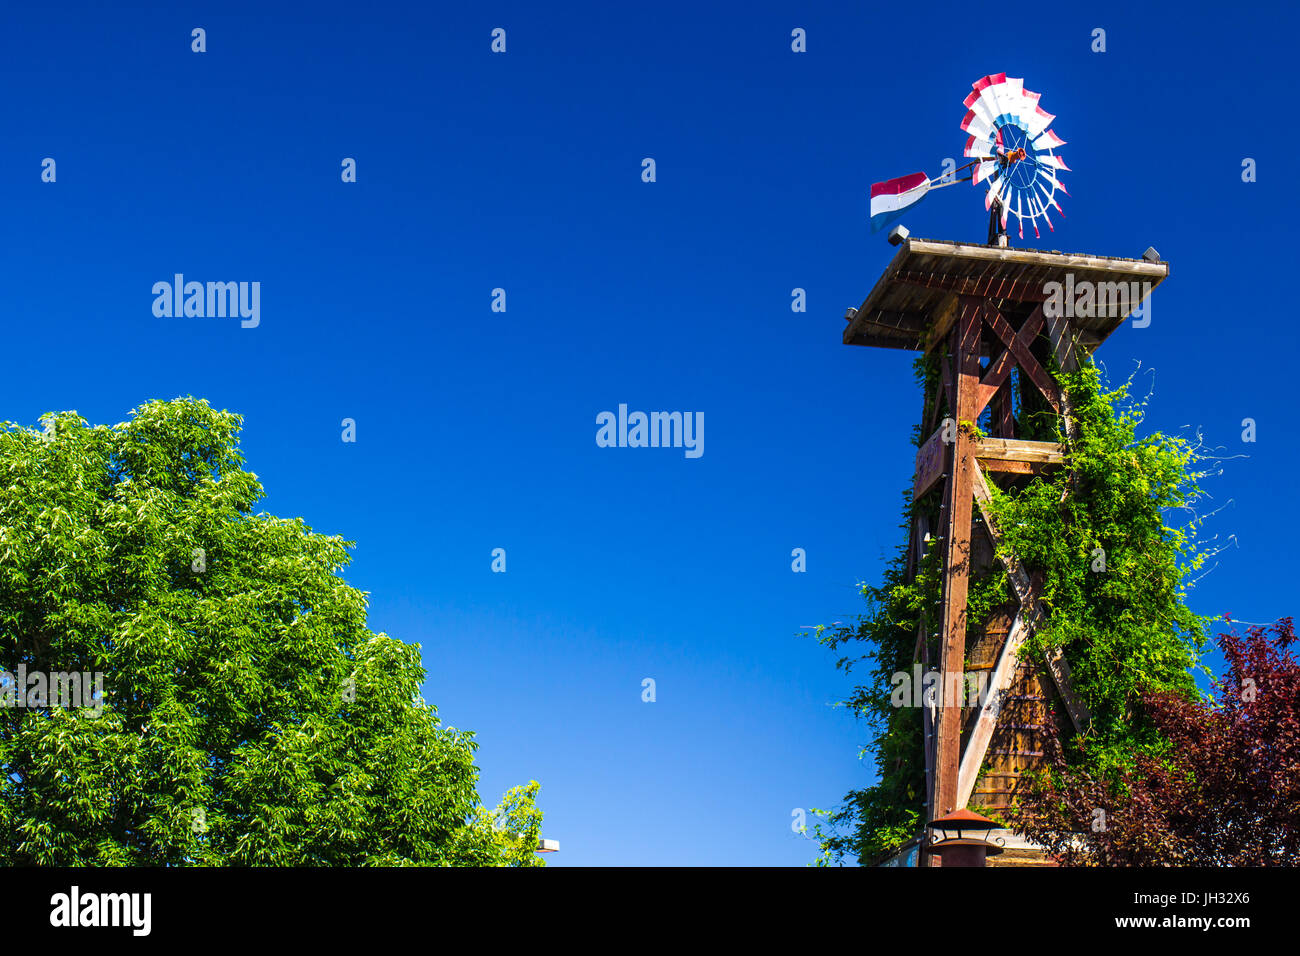 Wooden Tower with Water Tank & Patriotic Weather Vane Stock Photo